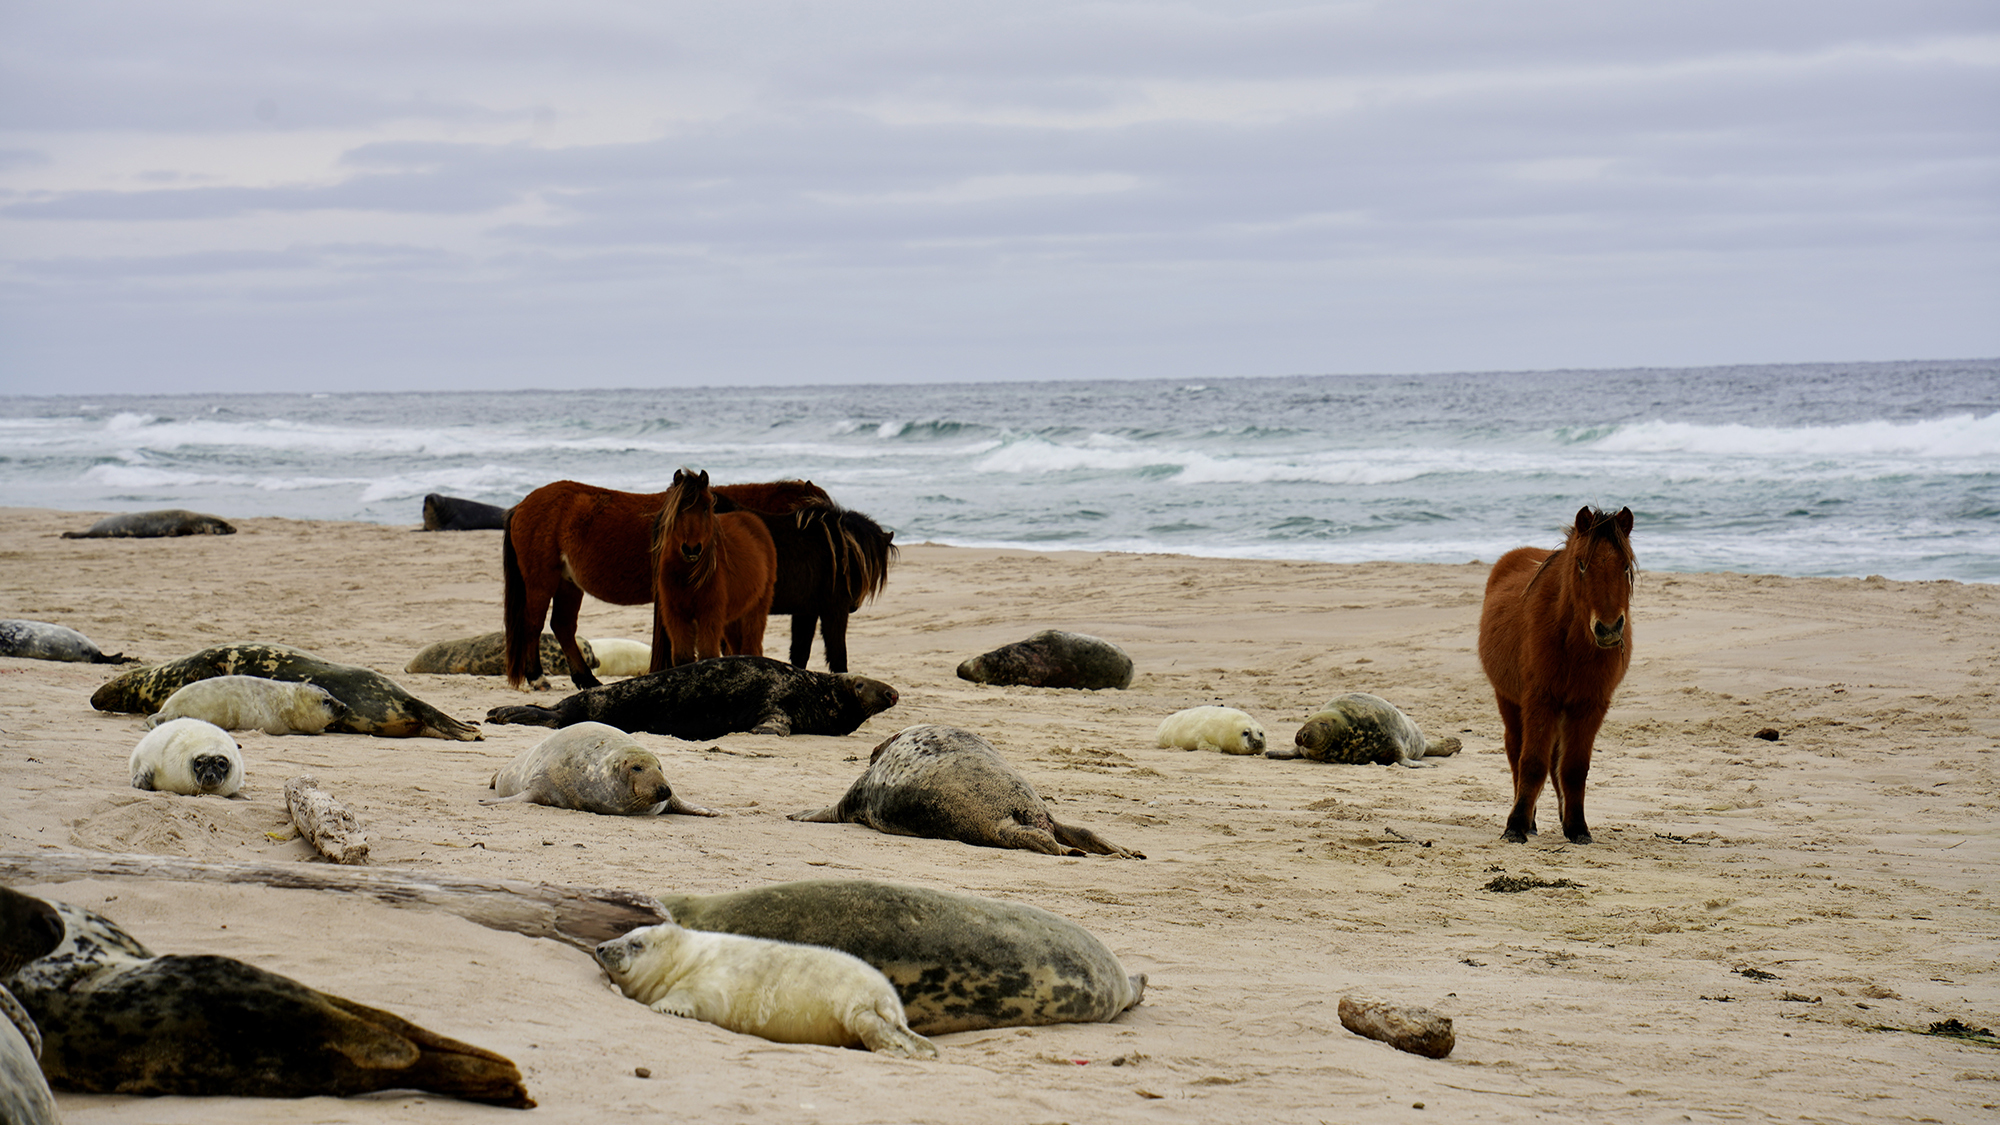 Eight gray seals and four wild horses stand on a sandy beach.